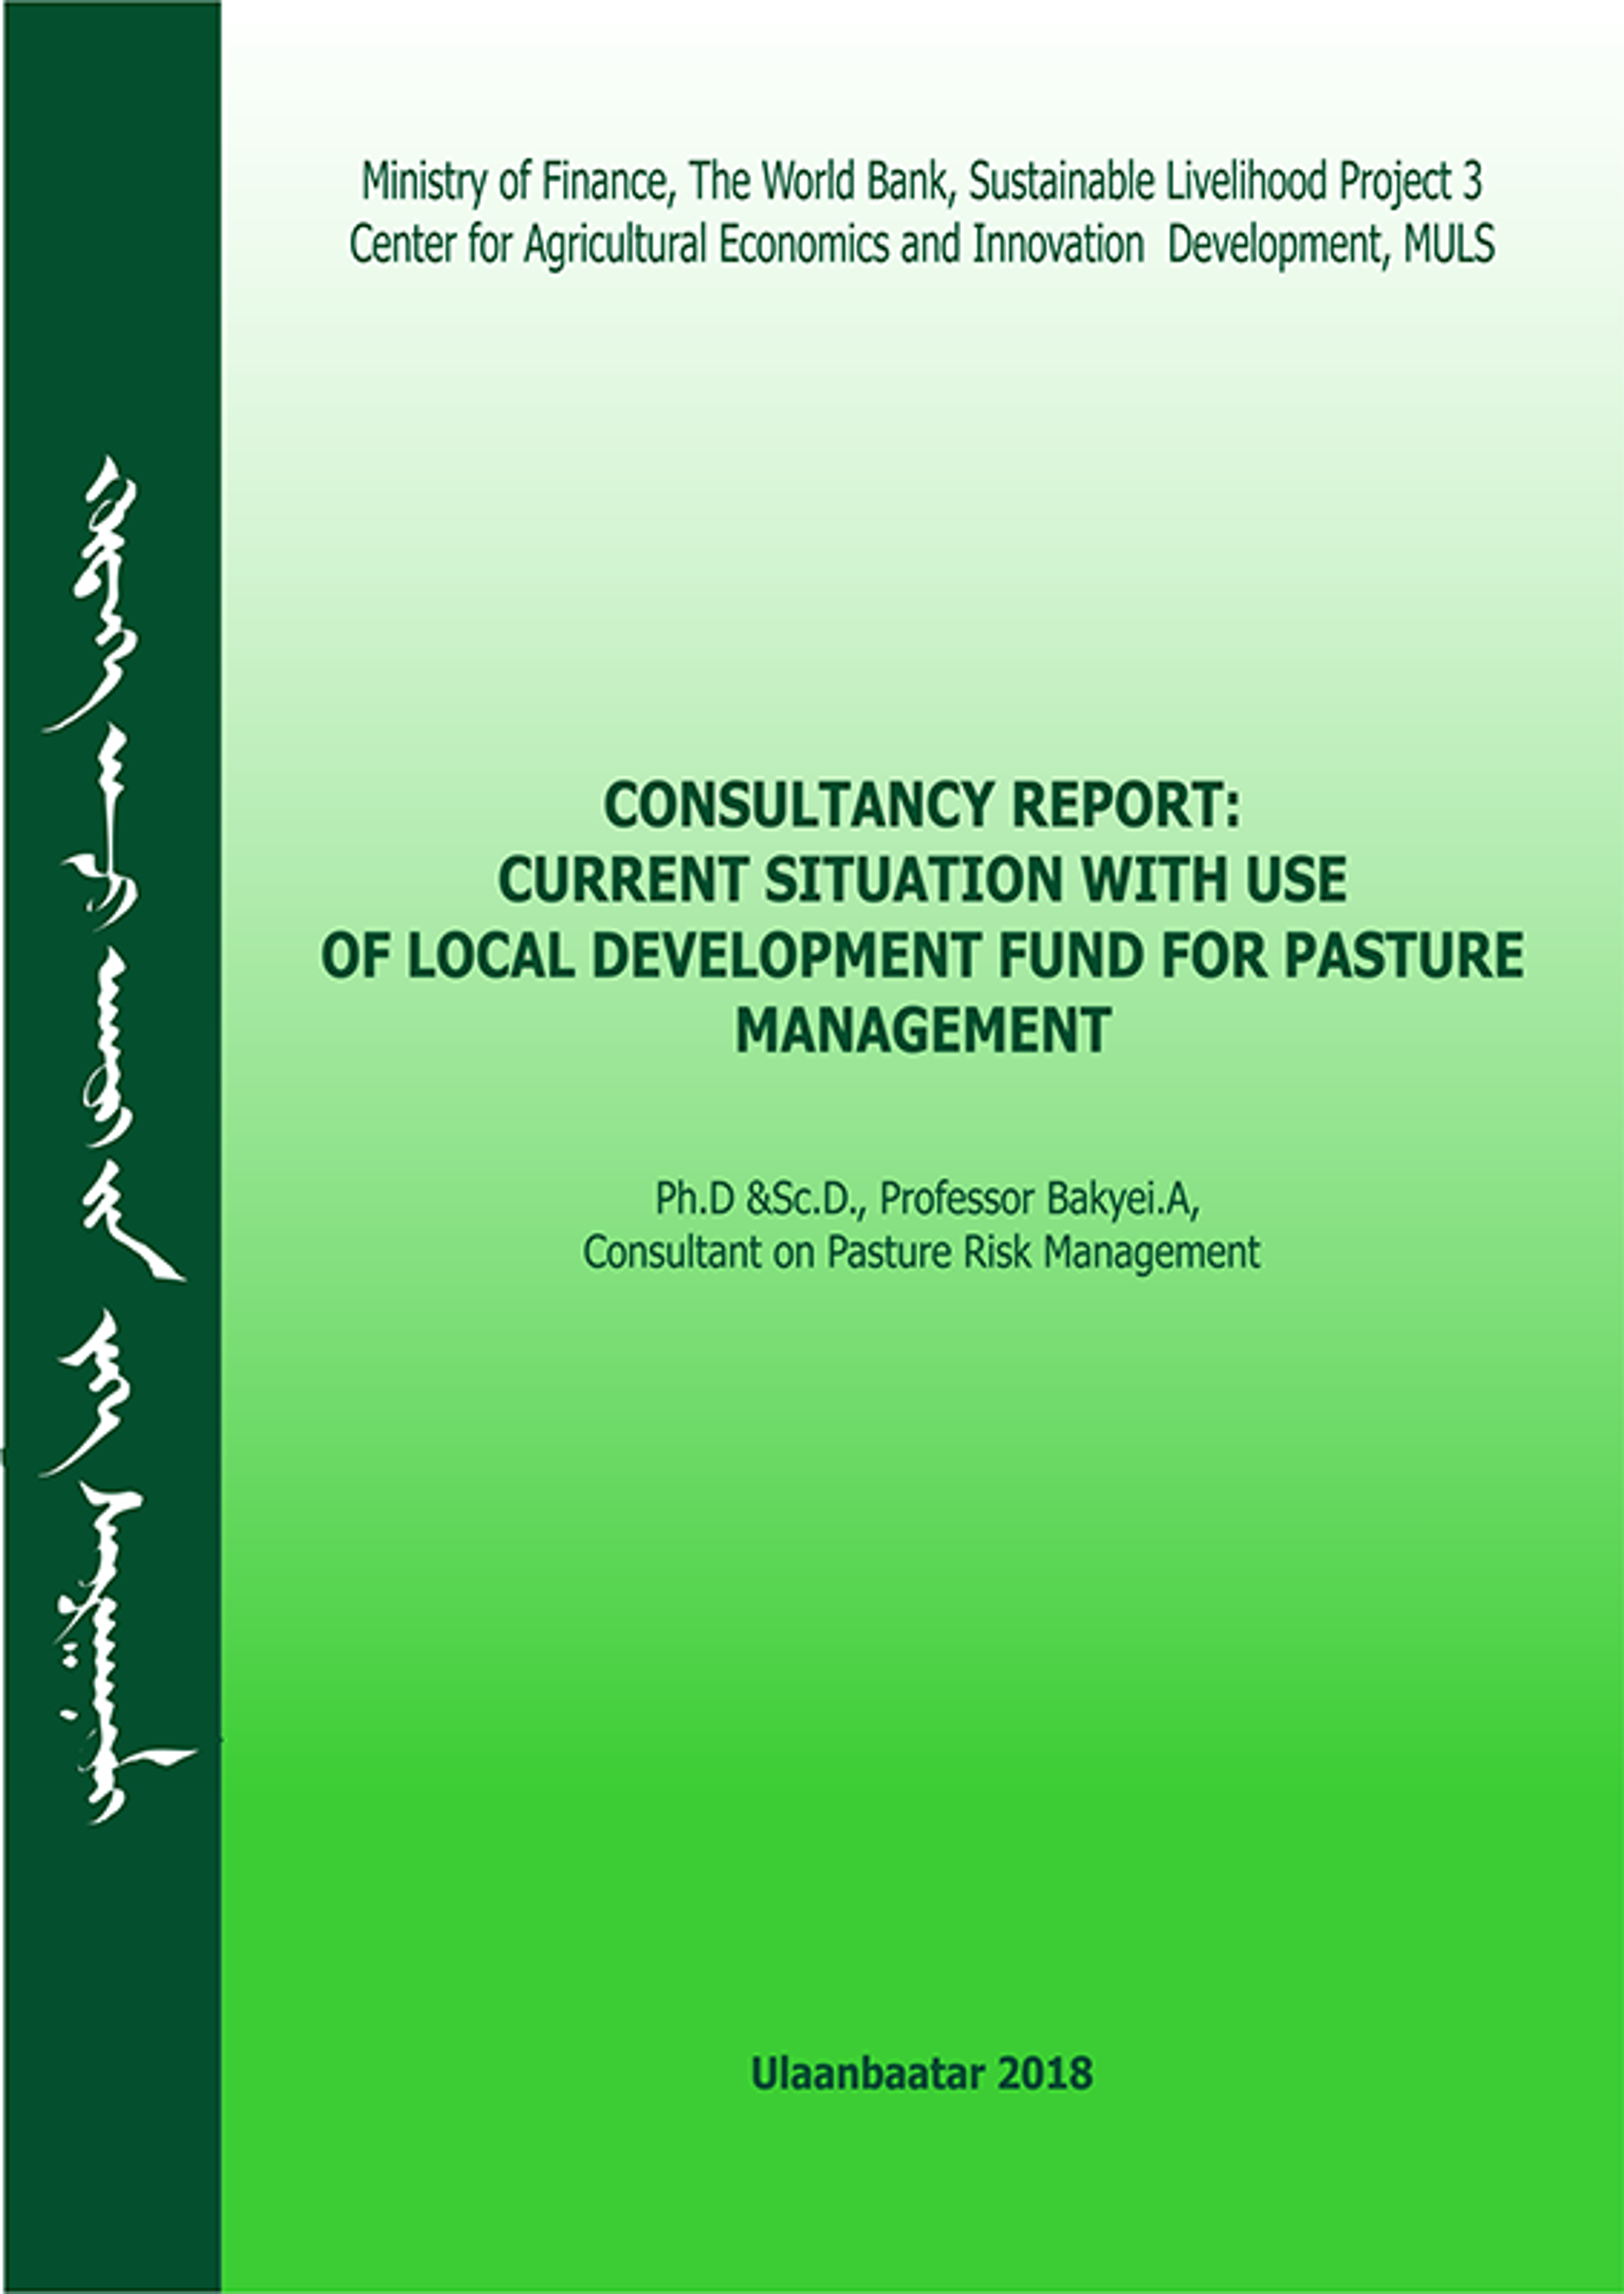 Consultancy report - Current situation with use of local development fund for pasture management